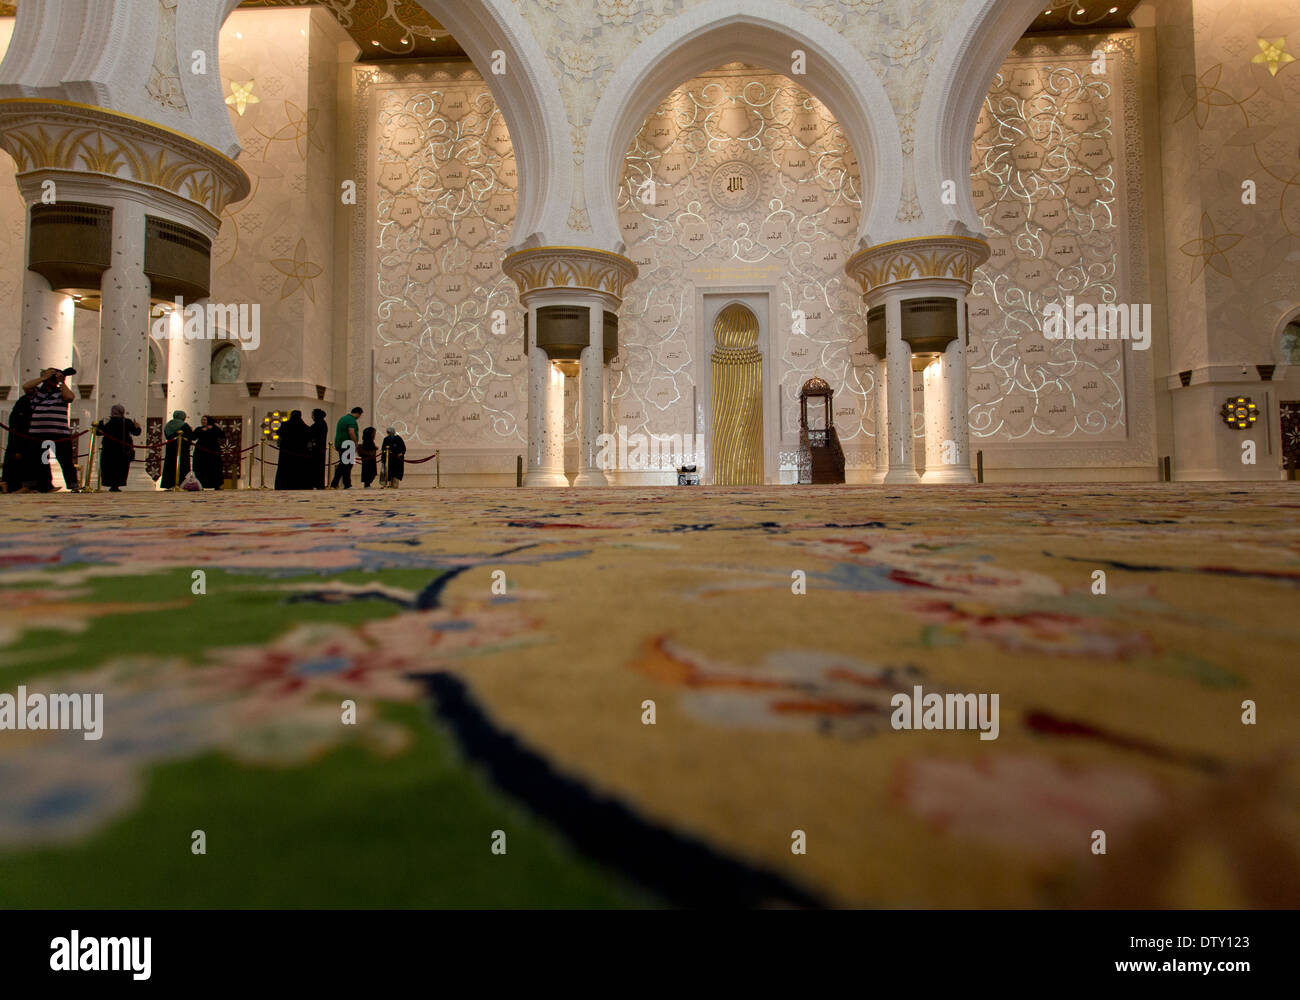 Sheikh Zayed Grand Mosque in Abu Dhabi United Arab Emirates interior showing the largest carpet in the world. Stock Photo